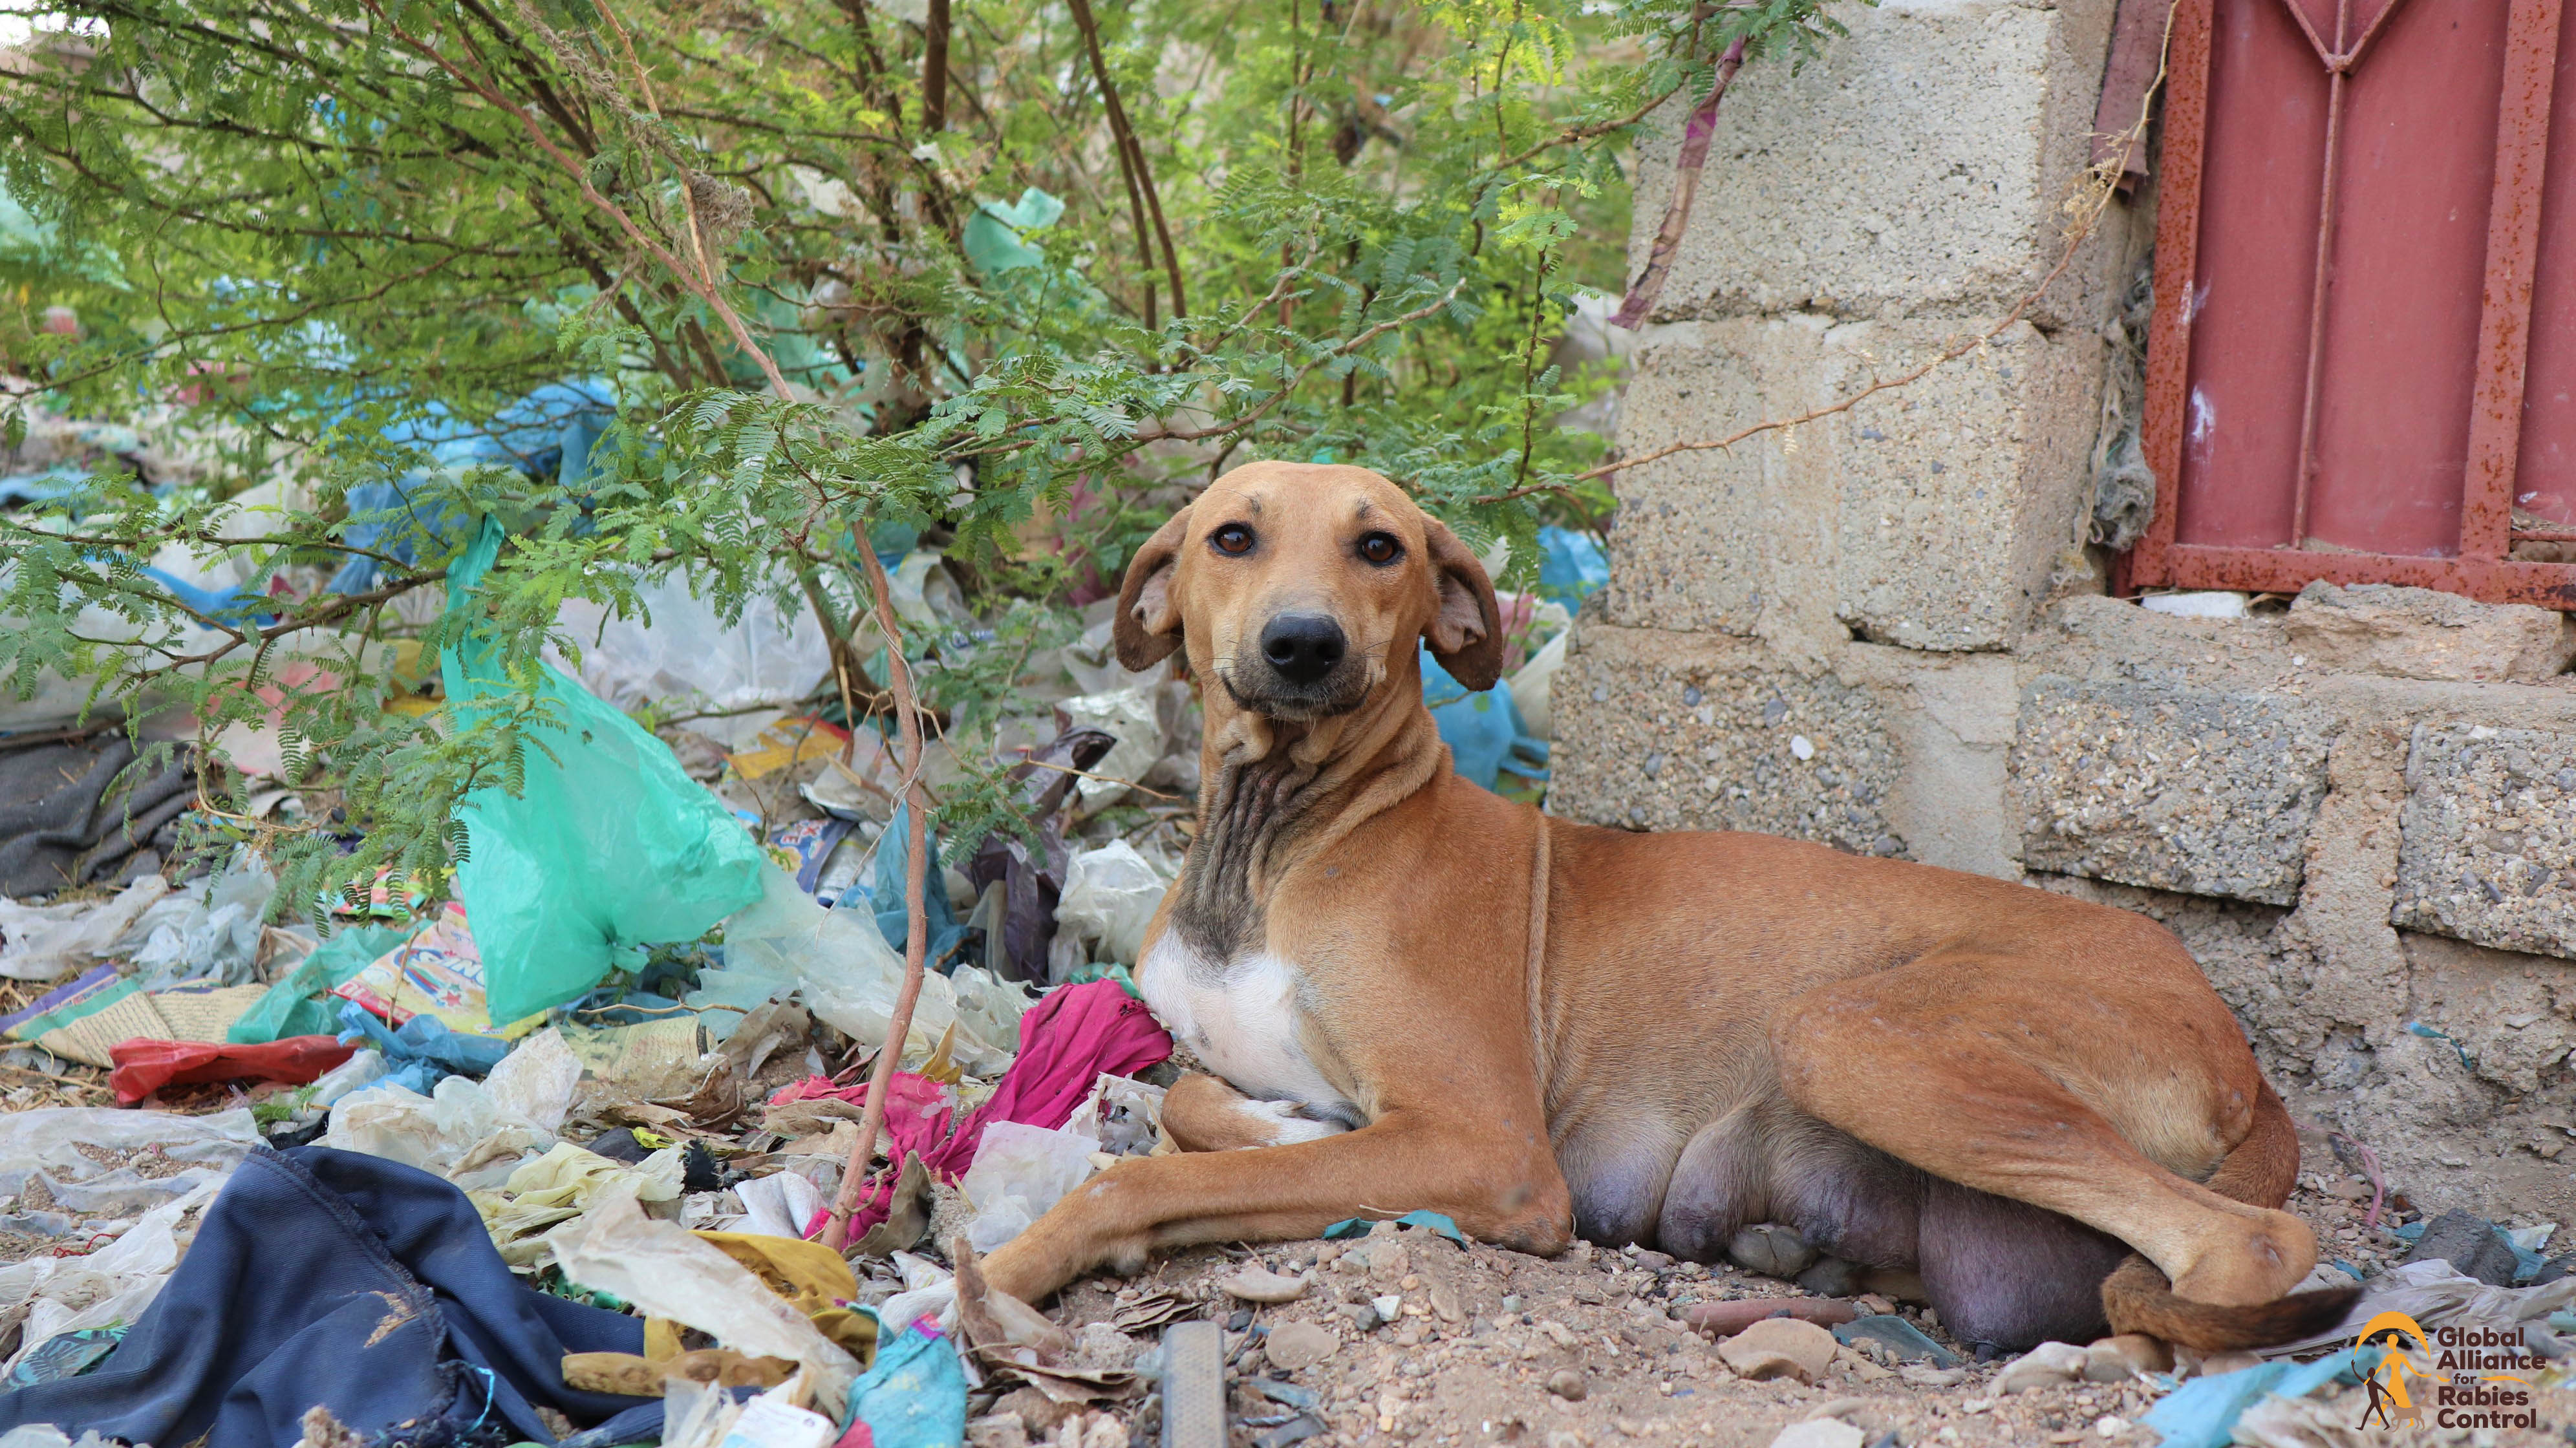 Free roaming dog bitch lying in garbage, Global Alliance for Rabies Control (GARC). 